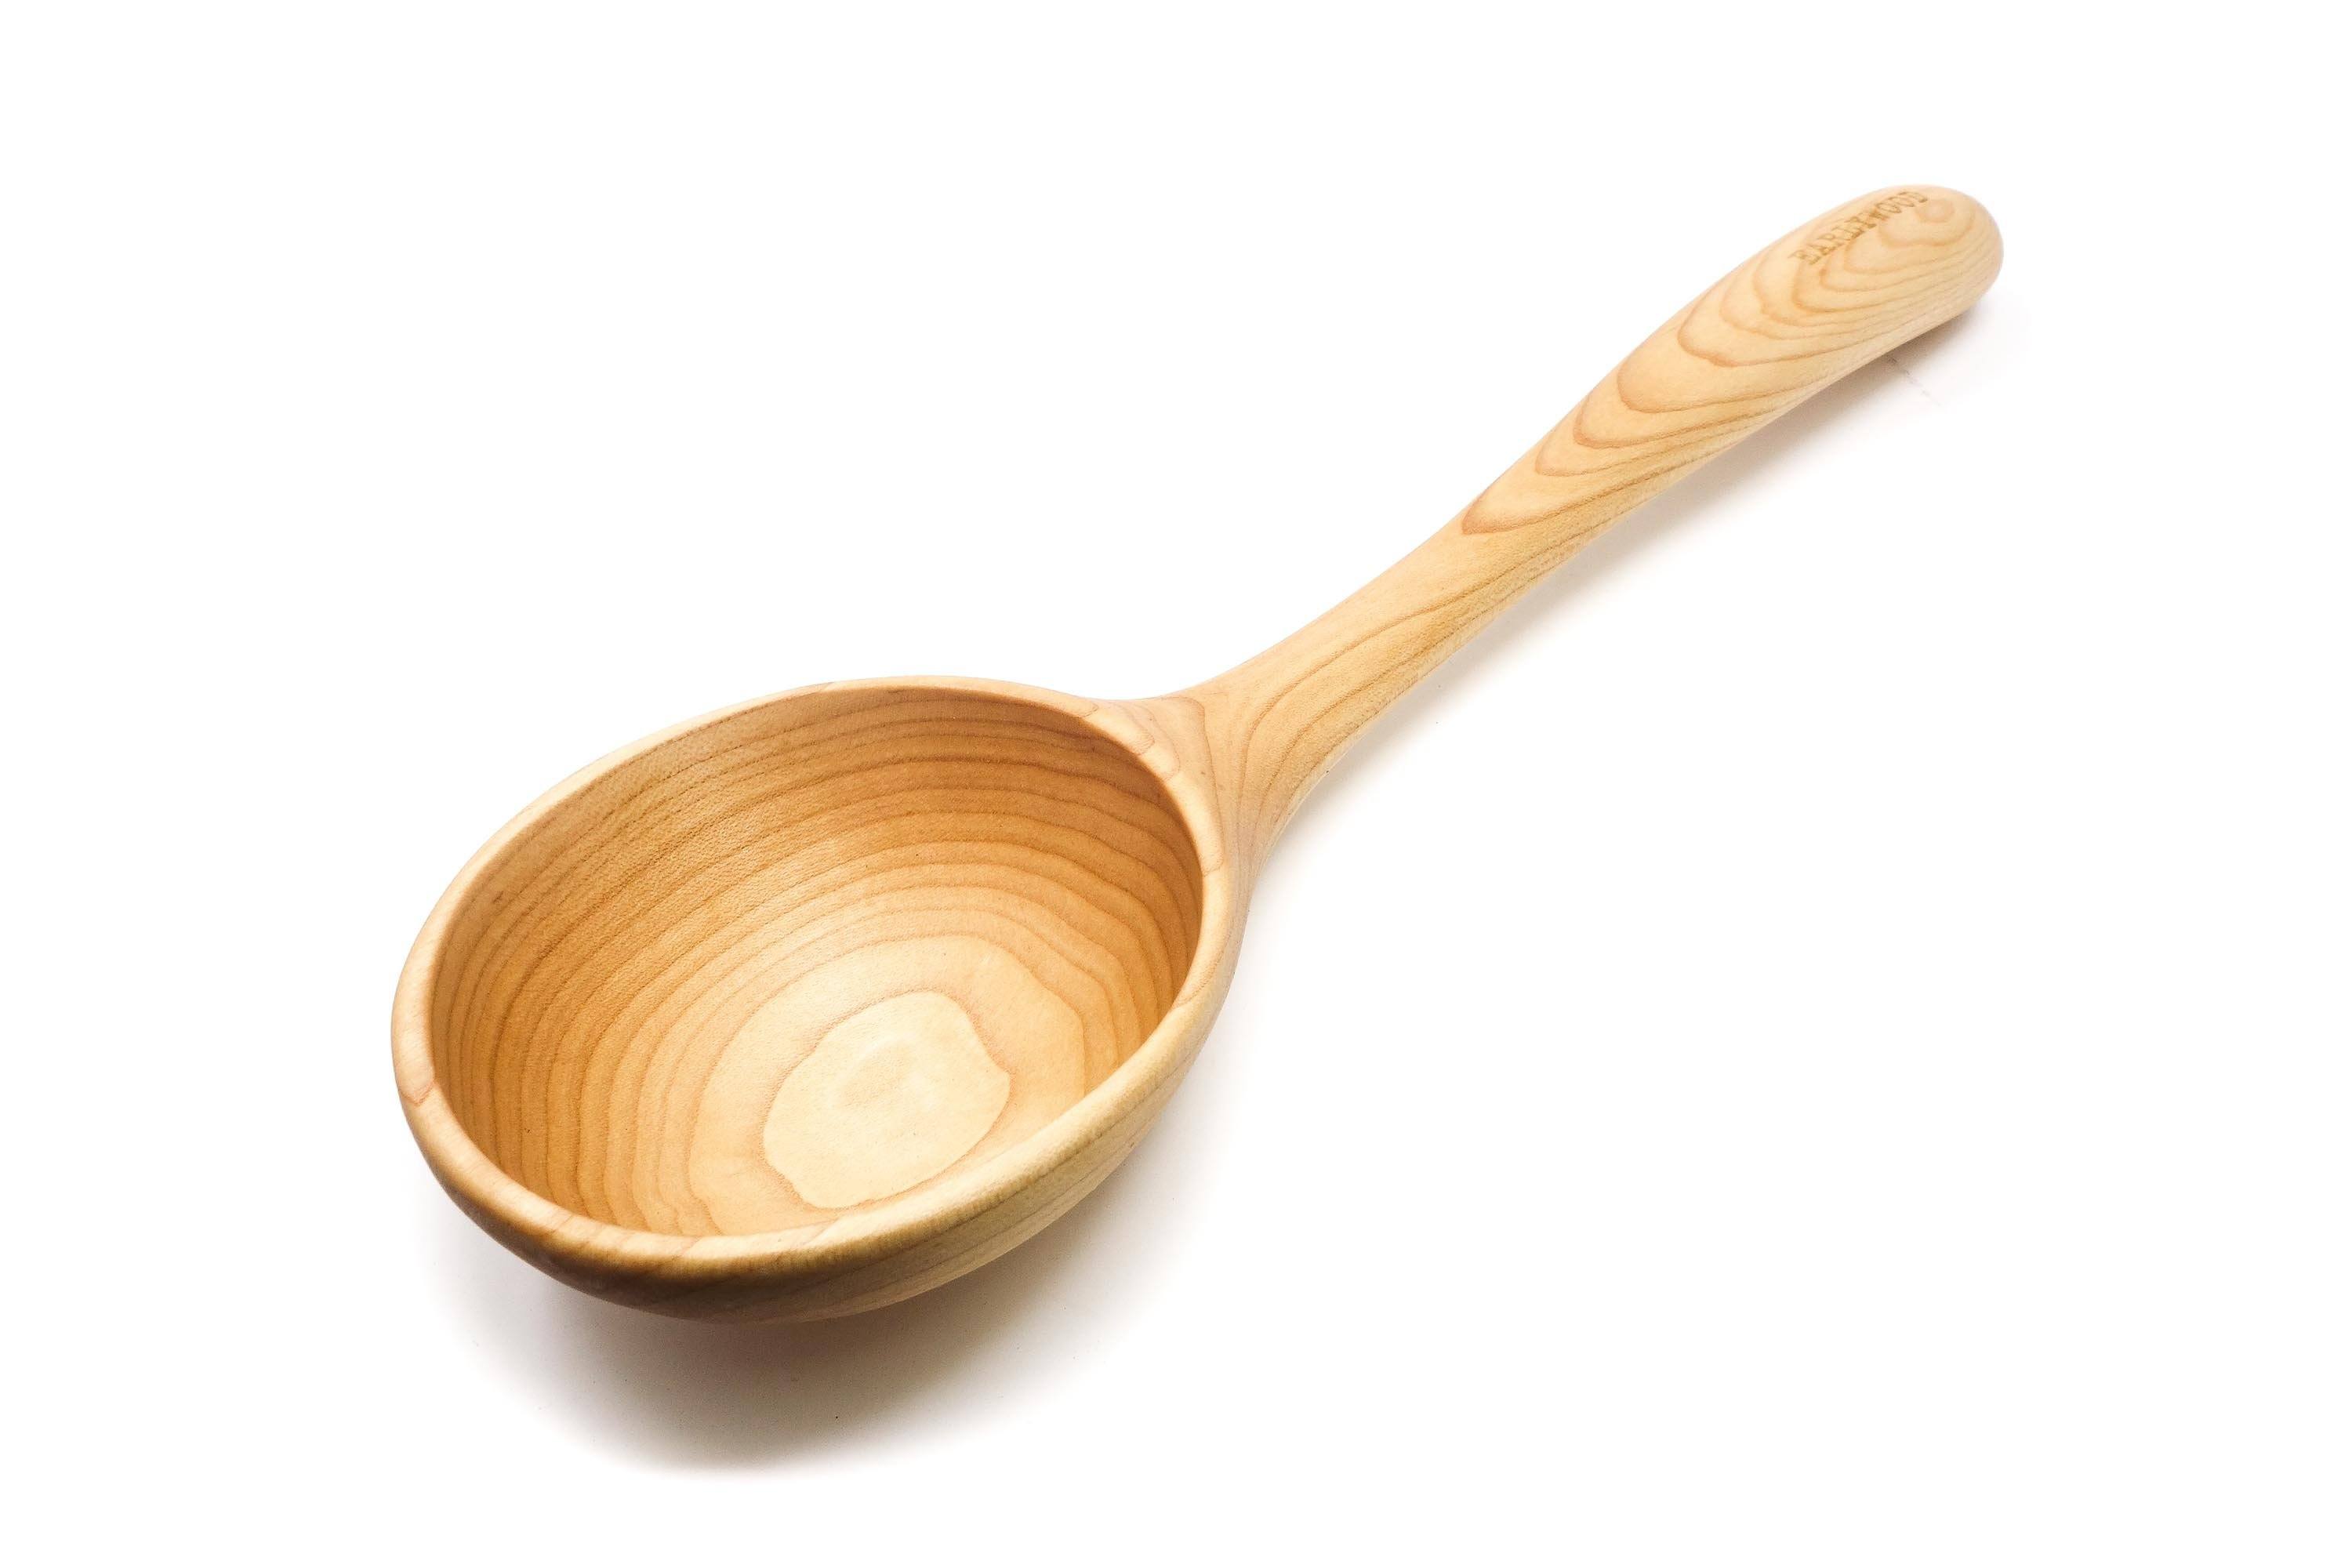 Hard Maple Soup Ladle For The Kitchen   Earlywood ?v=1580809892